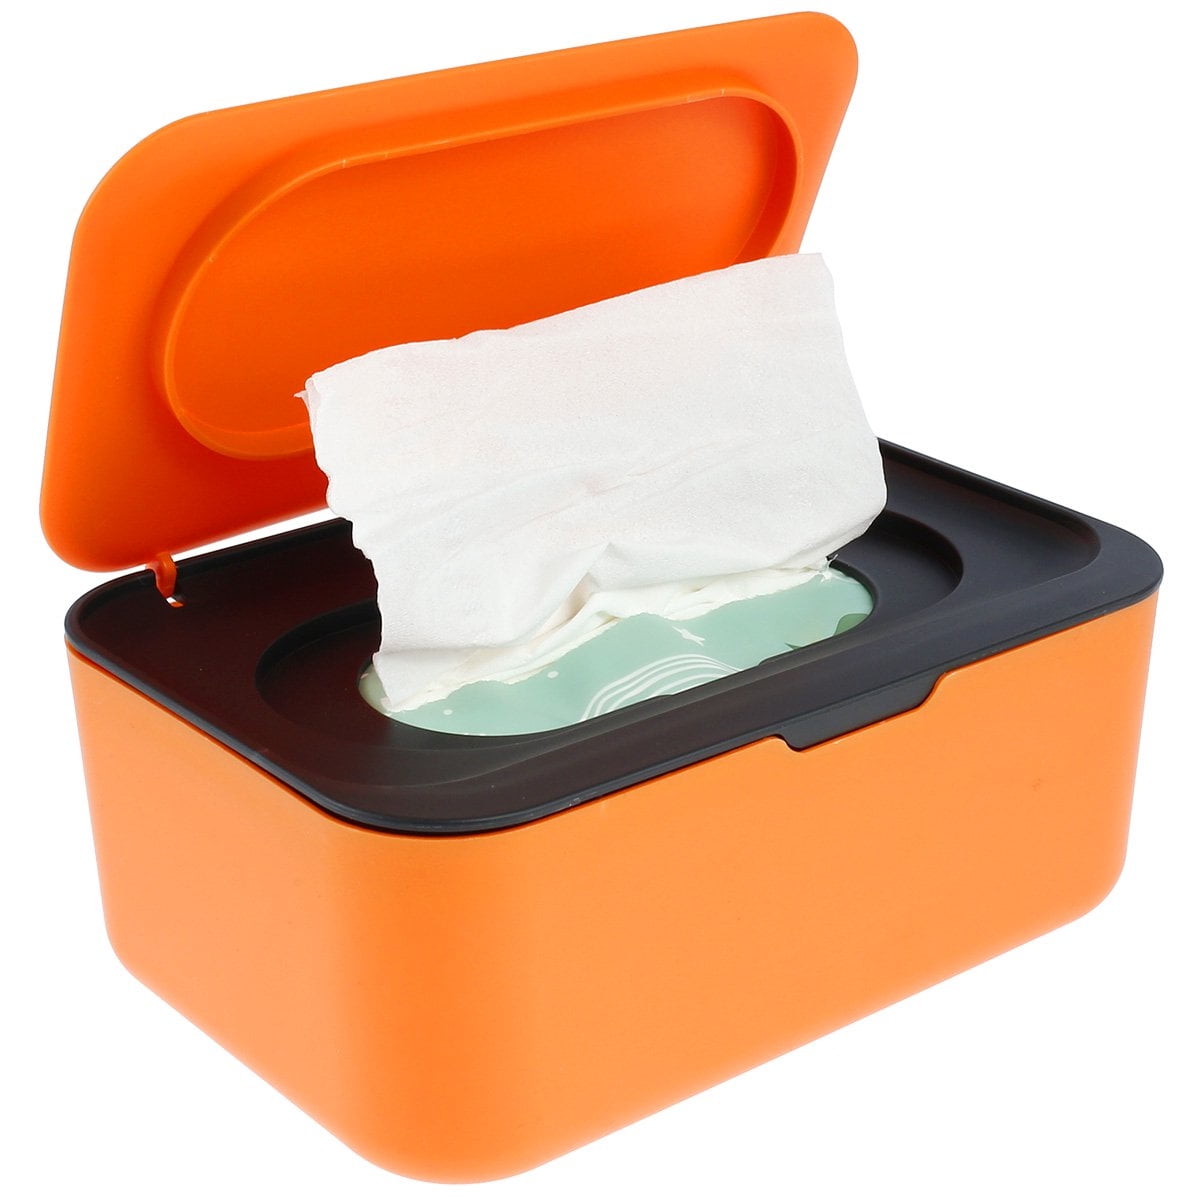 Tissue Storage Box Case, Enlarged Capacity Wet Wipes Dispenser Holder,  Facial Tissue Dispenser Box with Lid Sealed Rectangular for Home Office